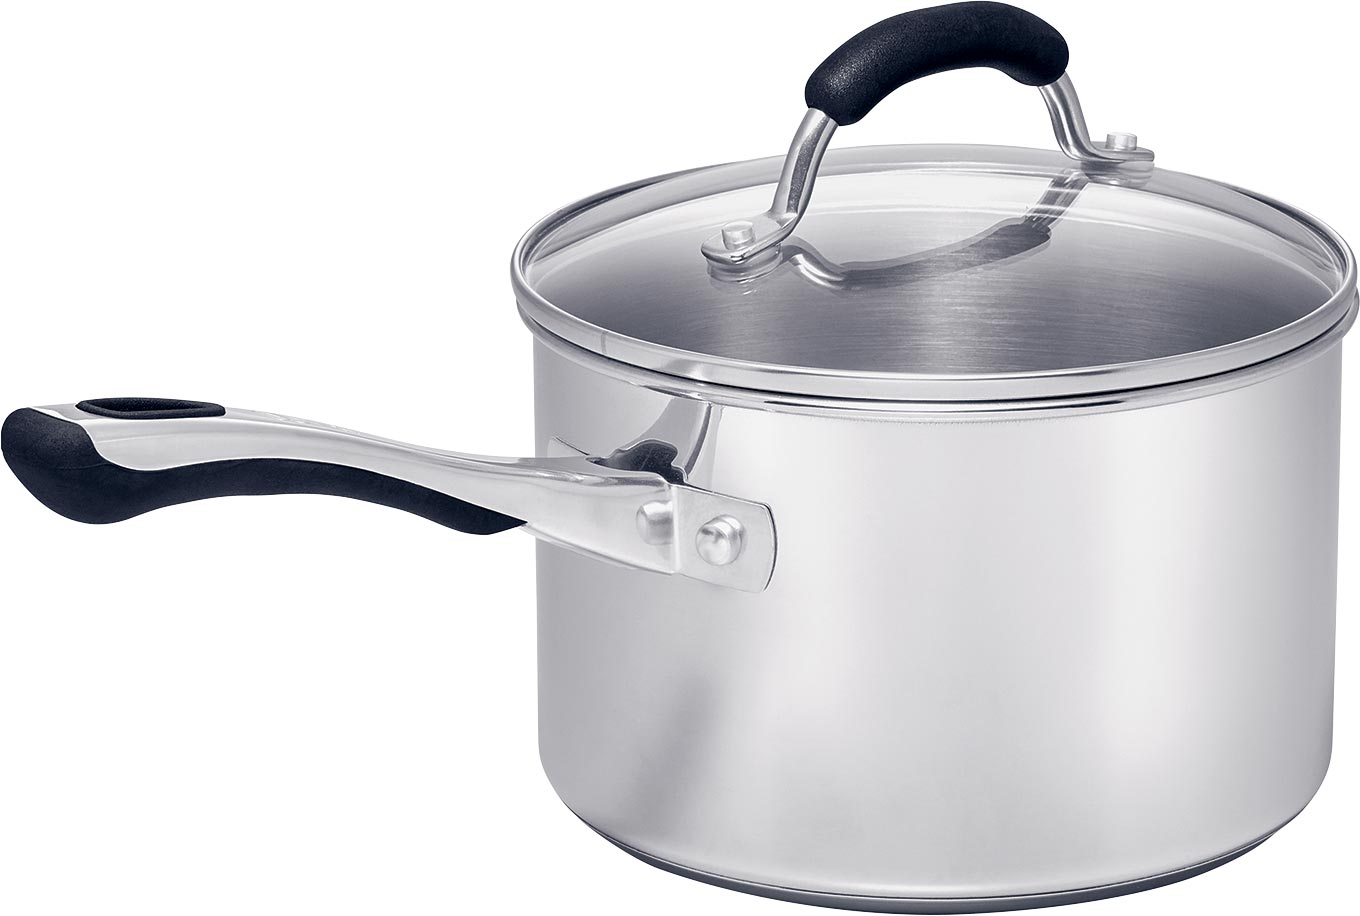 Raco Contemporary Stainless Steel Saucepan 18cm/2.8L